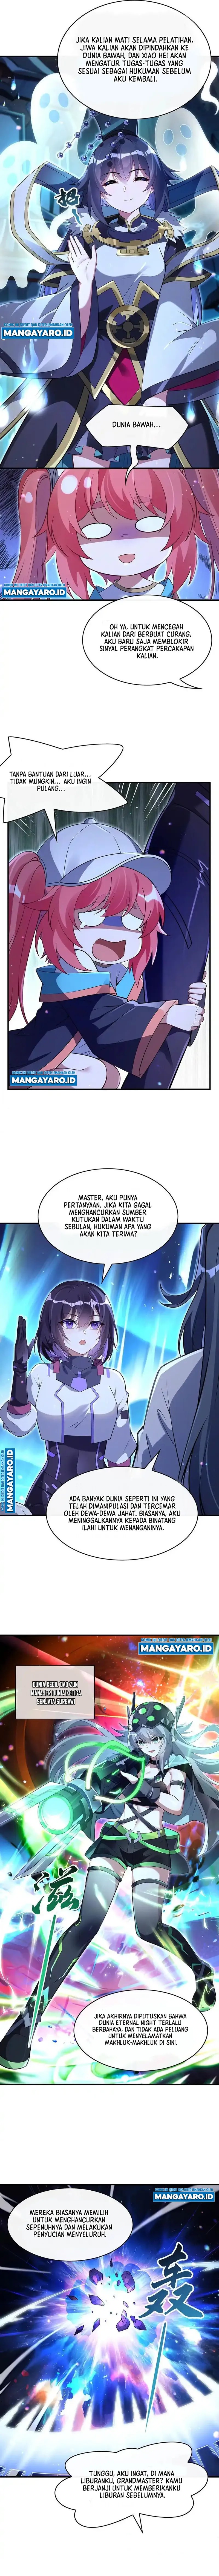 Dilarang COPAS - situs resmi www.mangacanblog.com - Komik my female apprentices are all big shots from the future 272 - chapter 272 273 Indonesia my female apprentices are all big shots from the future 272 - chapter 272 Terbaru 2|Baca Manga Komik Indonesia|Mangacan